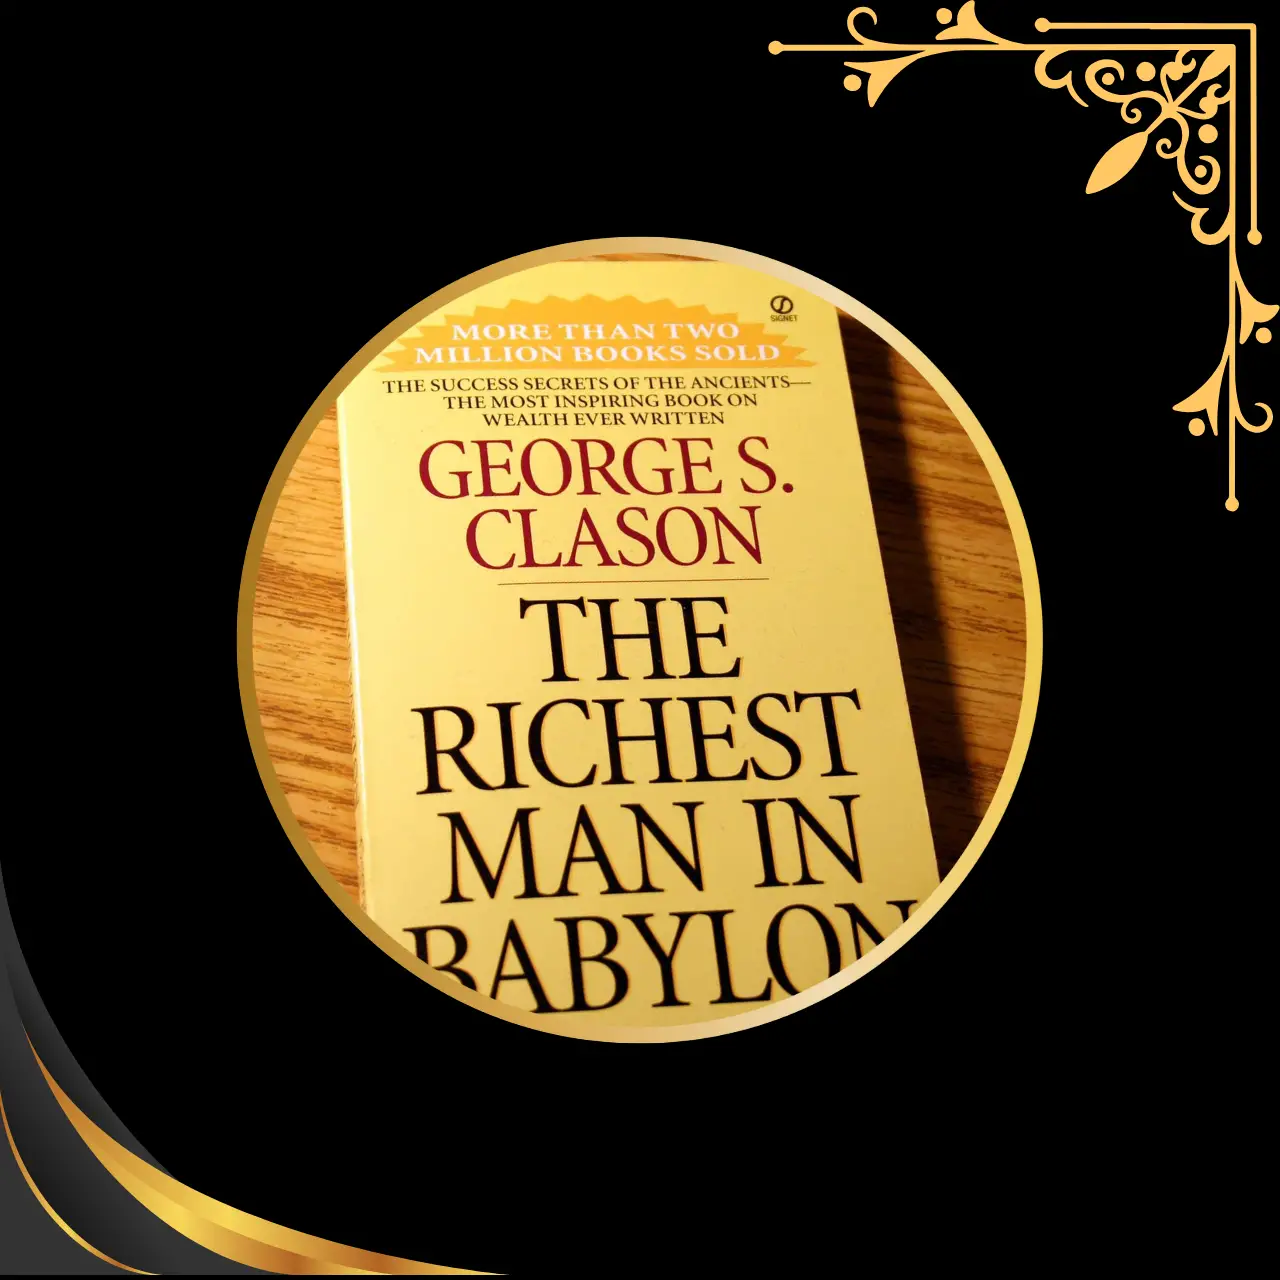 The Richest Man in Babylon book cover: An ancient scroll with inscriptions, representing timeless ancient financial wisdom